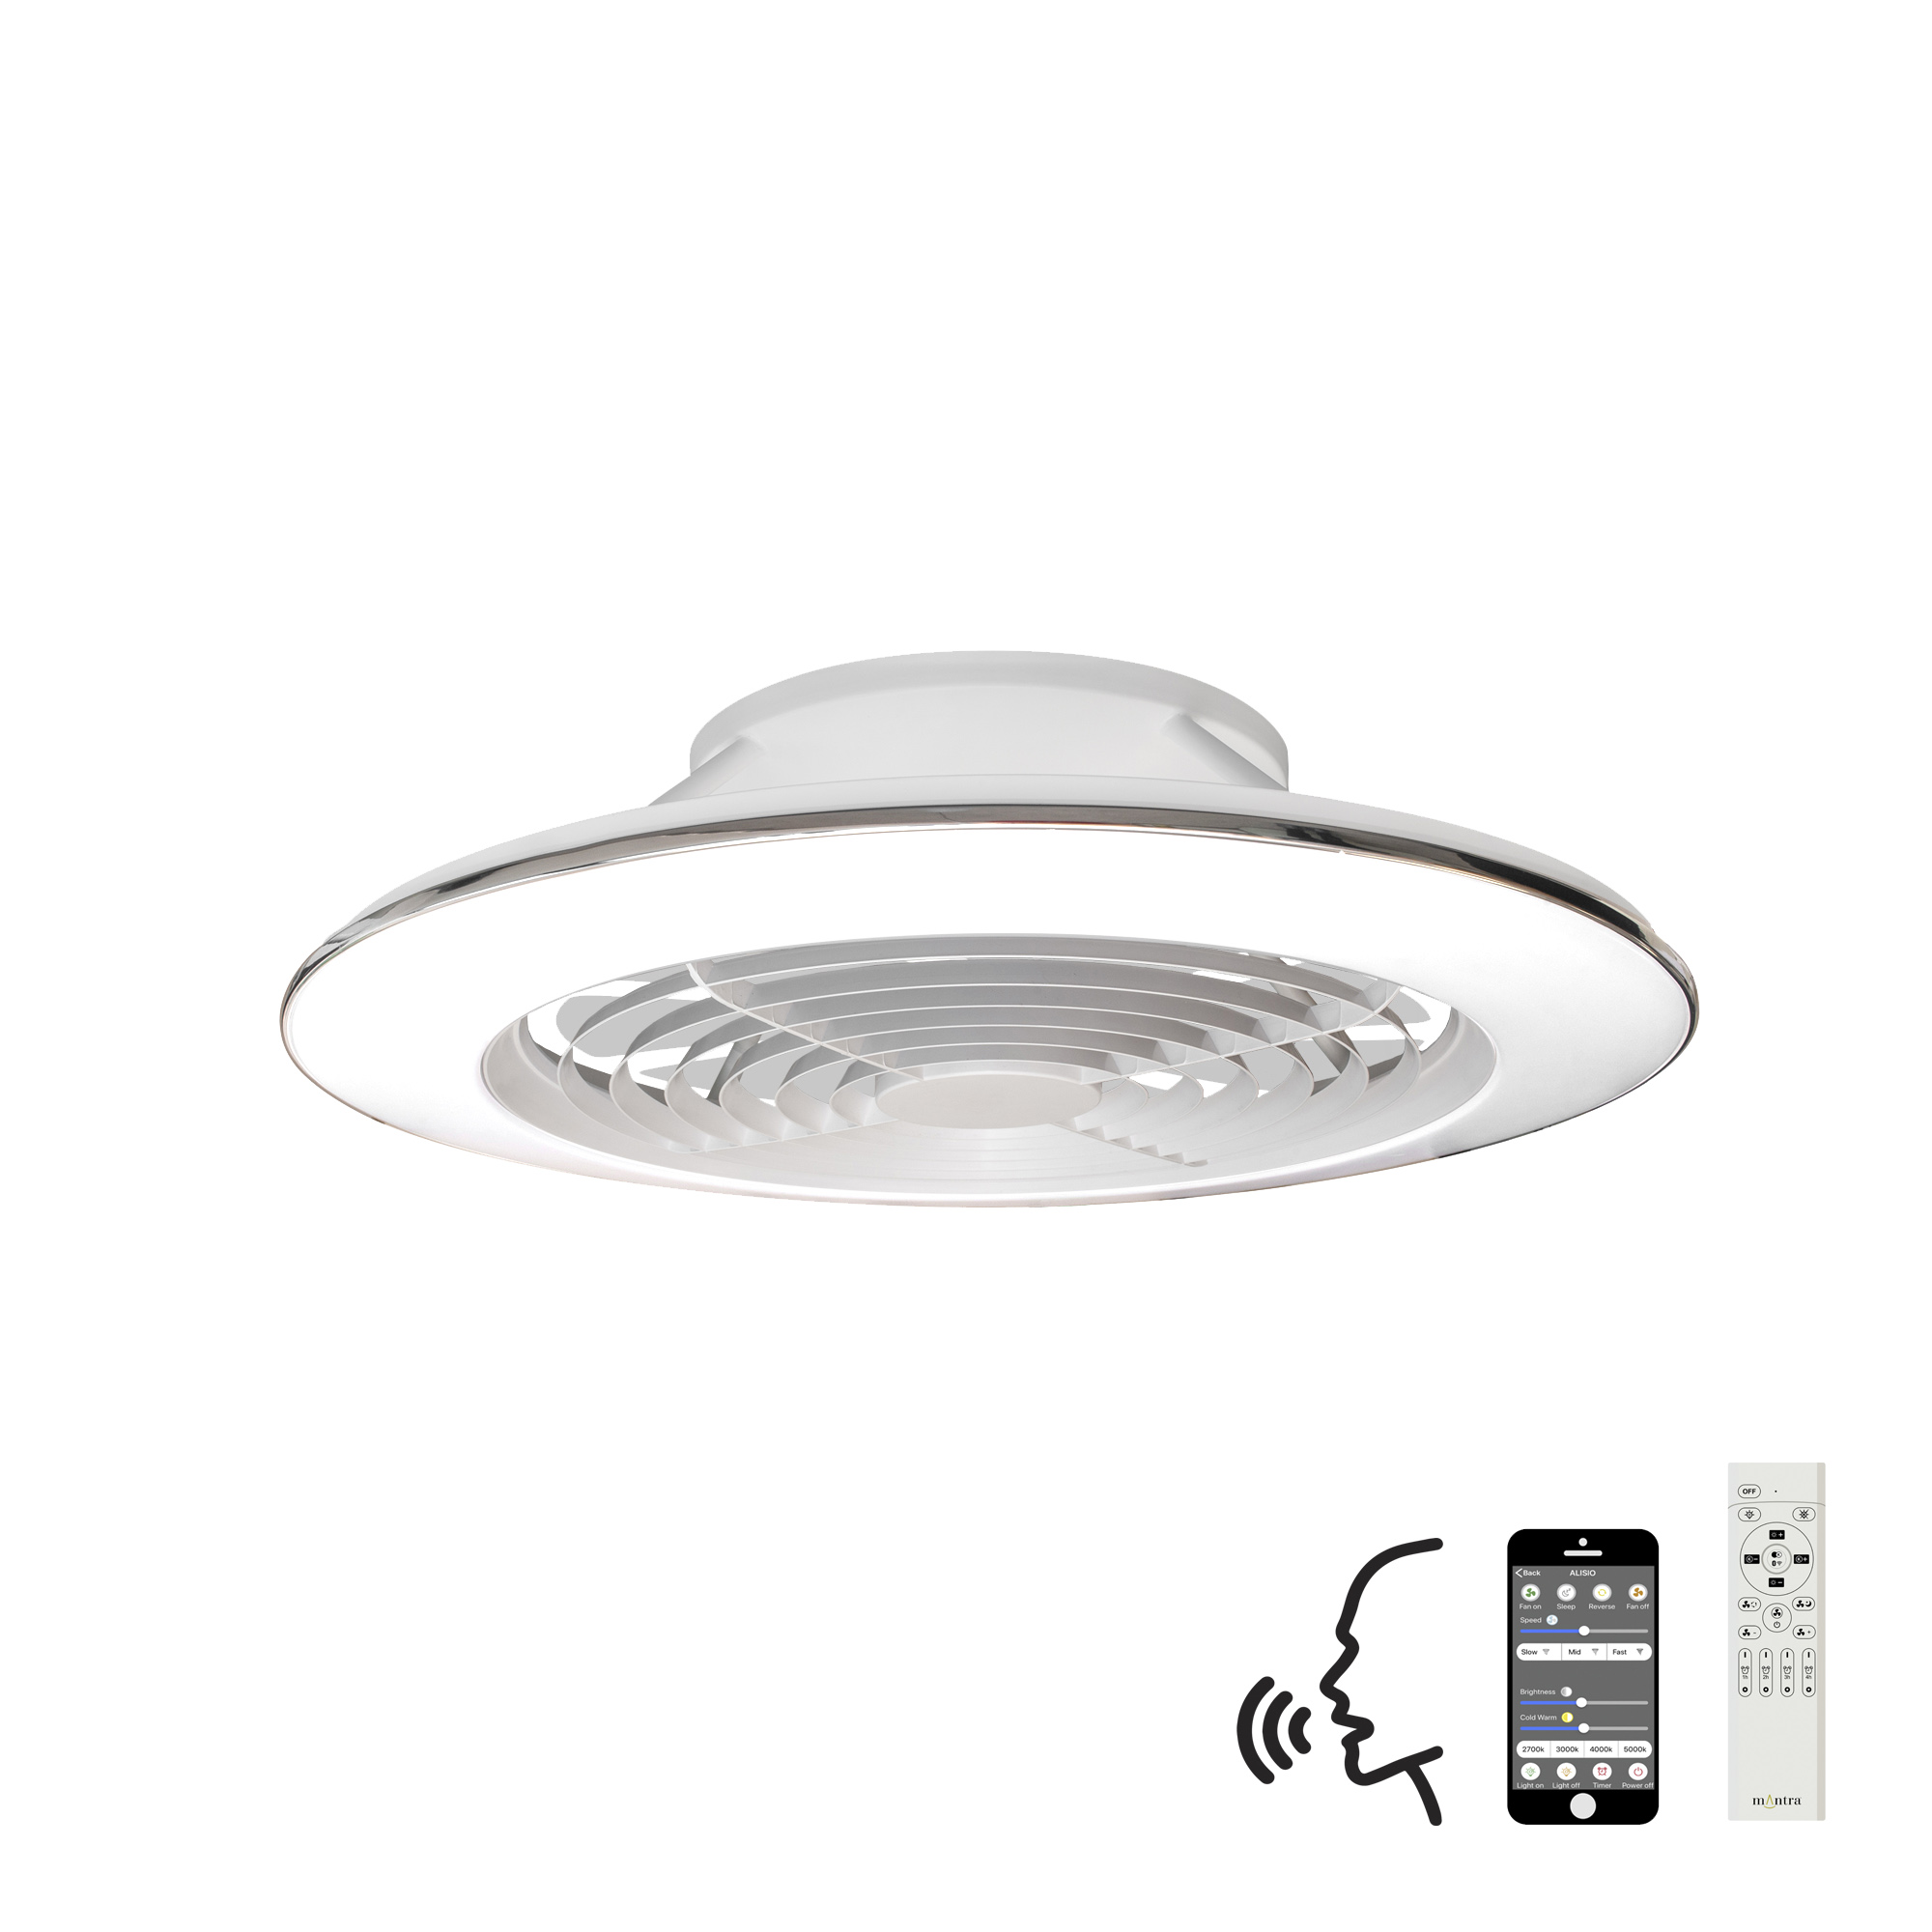 M7490  Alisio XL 95W LED Dimmable Ceiling Light & Fan; Remote / APP / Voice Controlled White